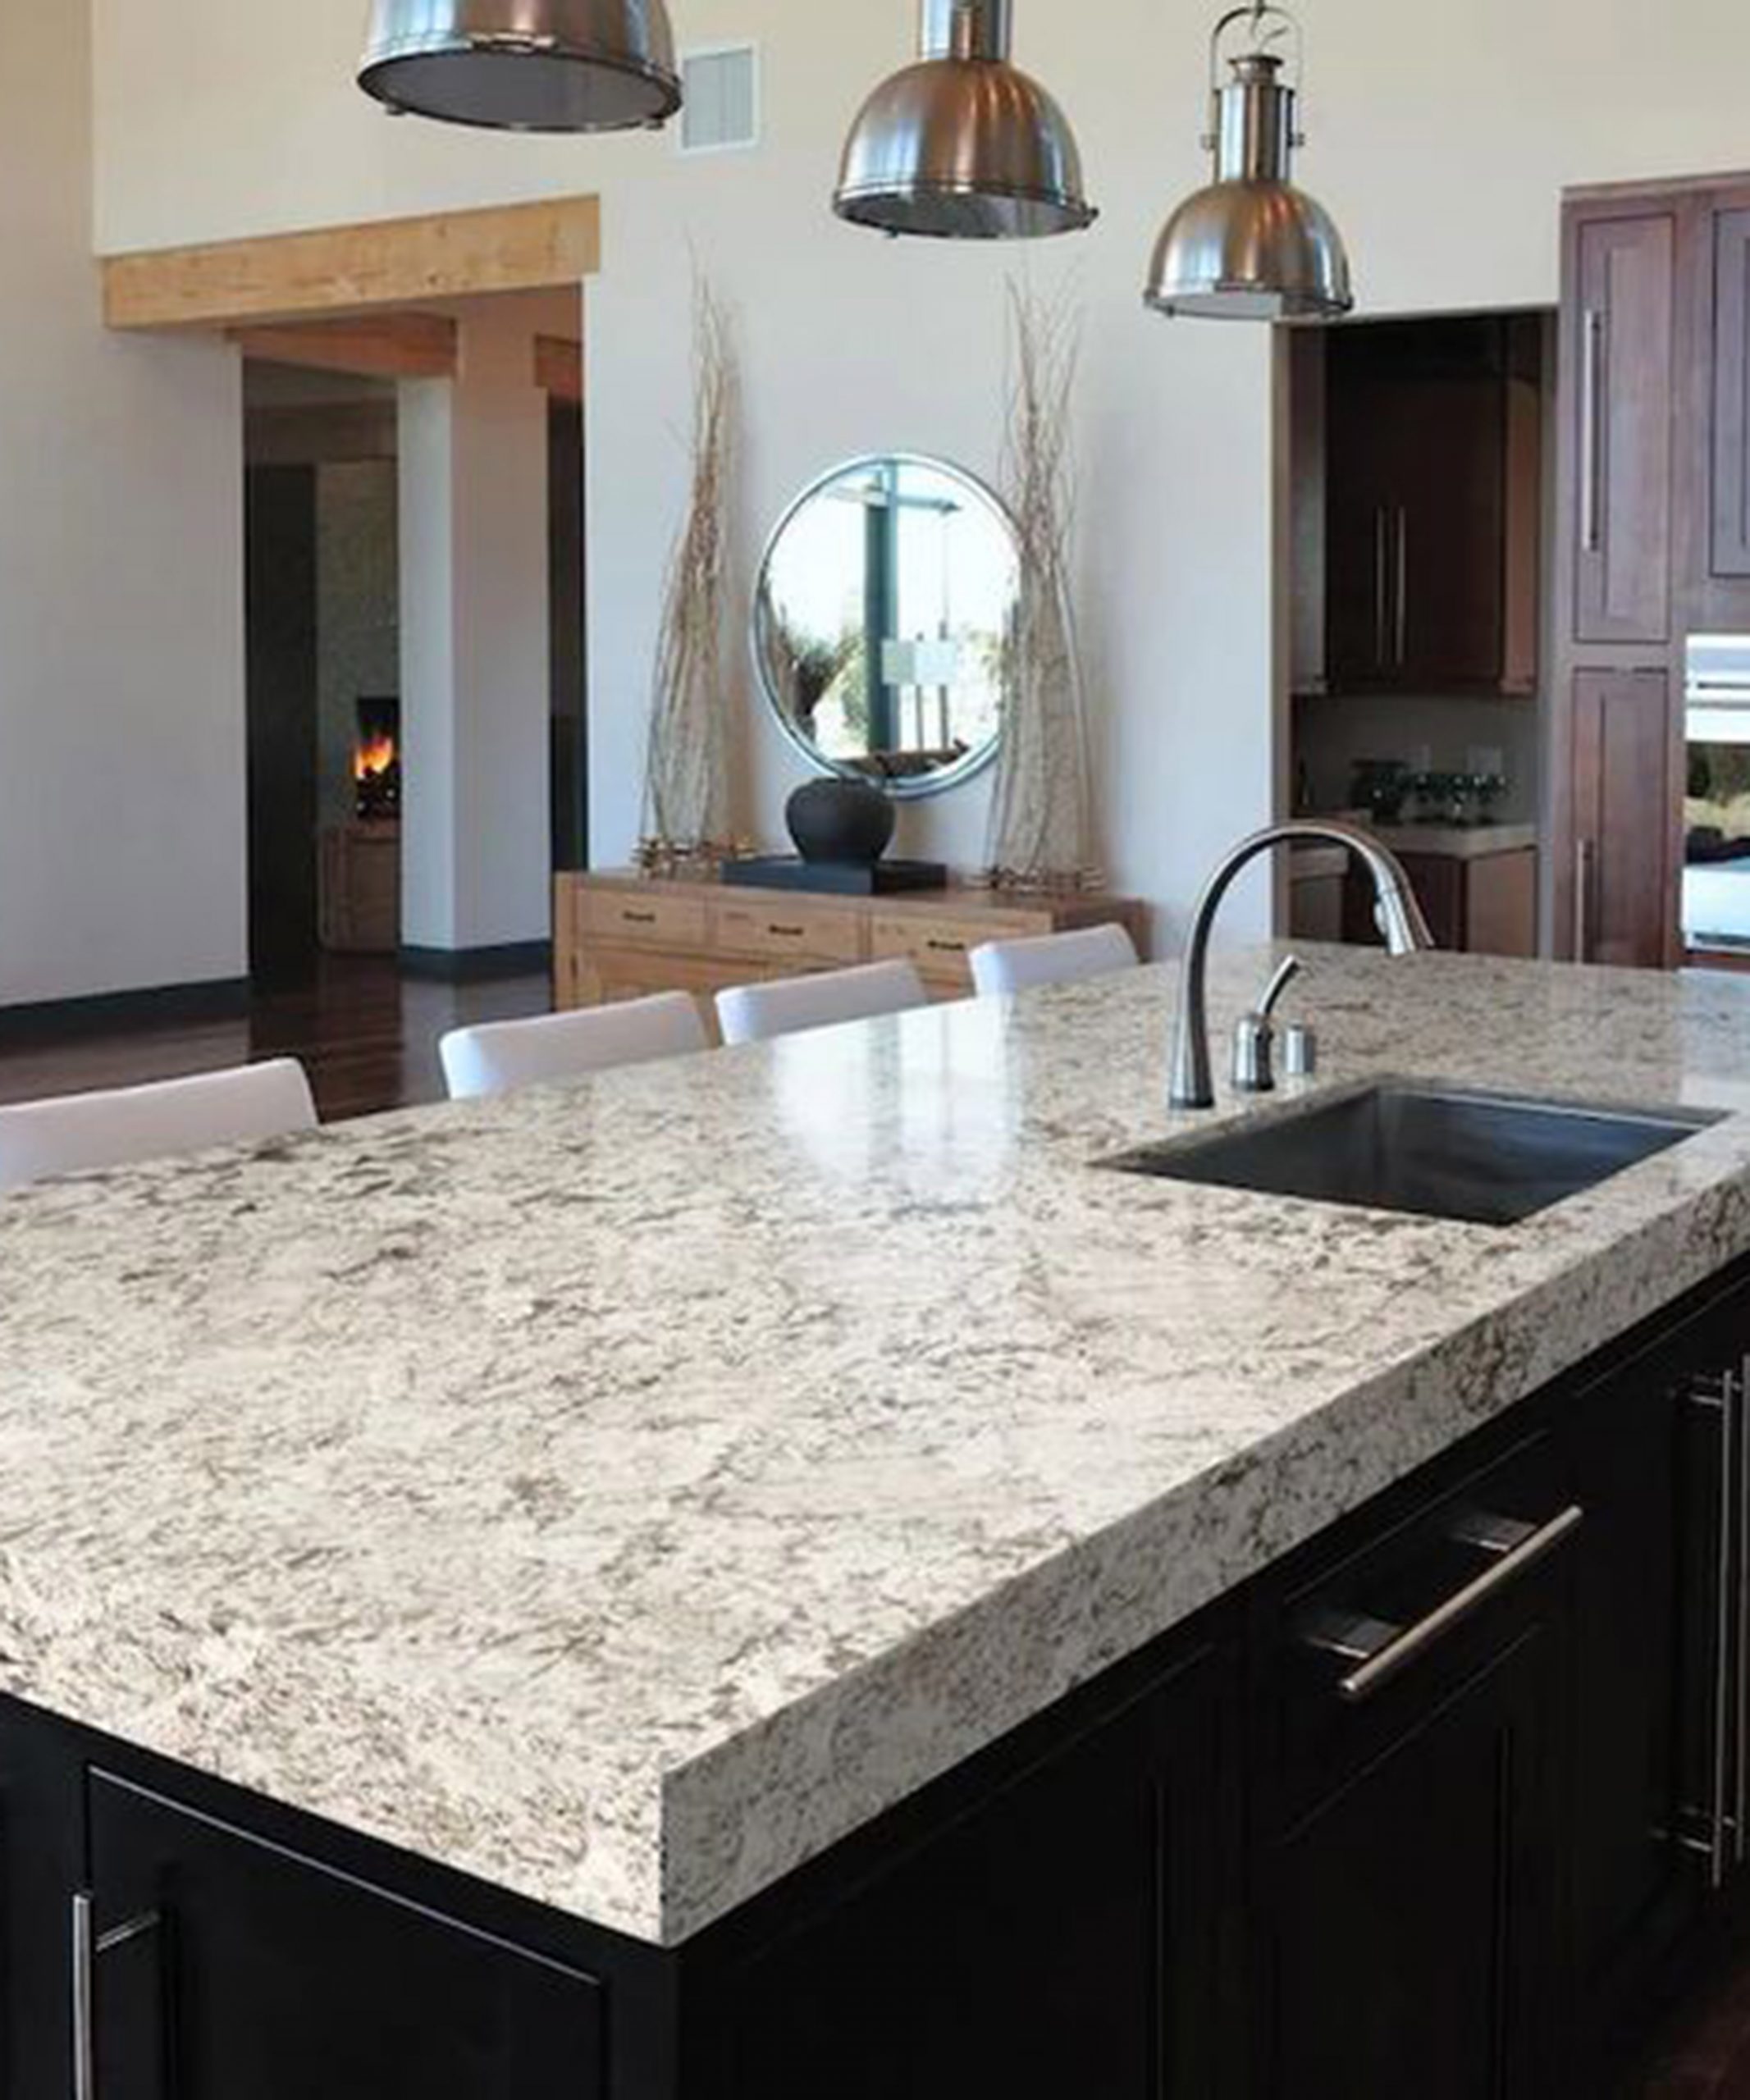 exporter of natural stones like marble, onyx, travertine, and granite